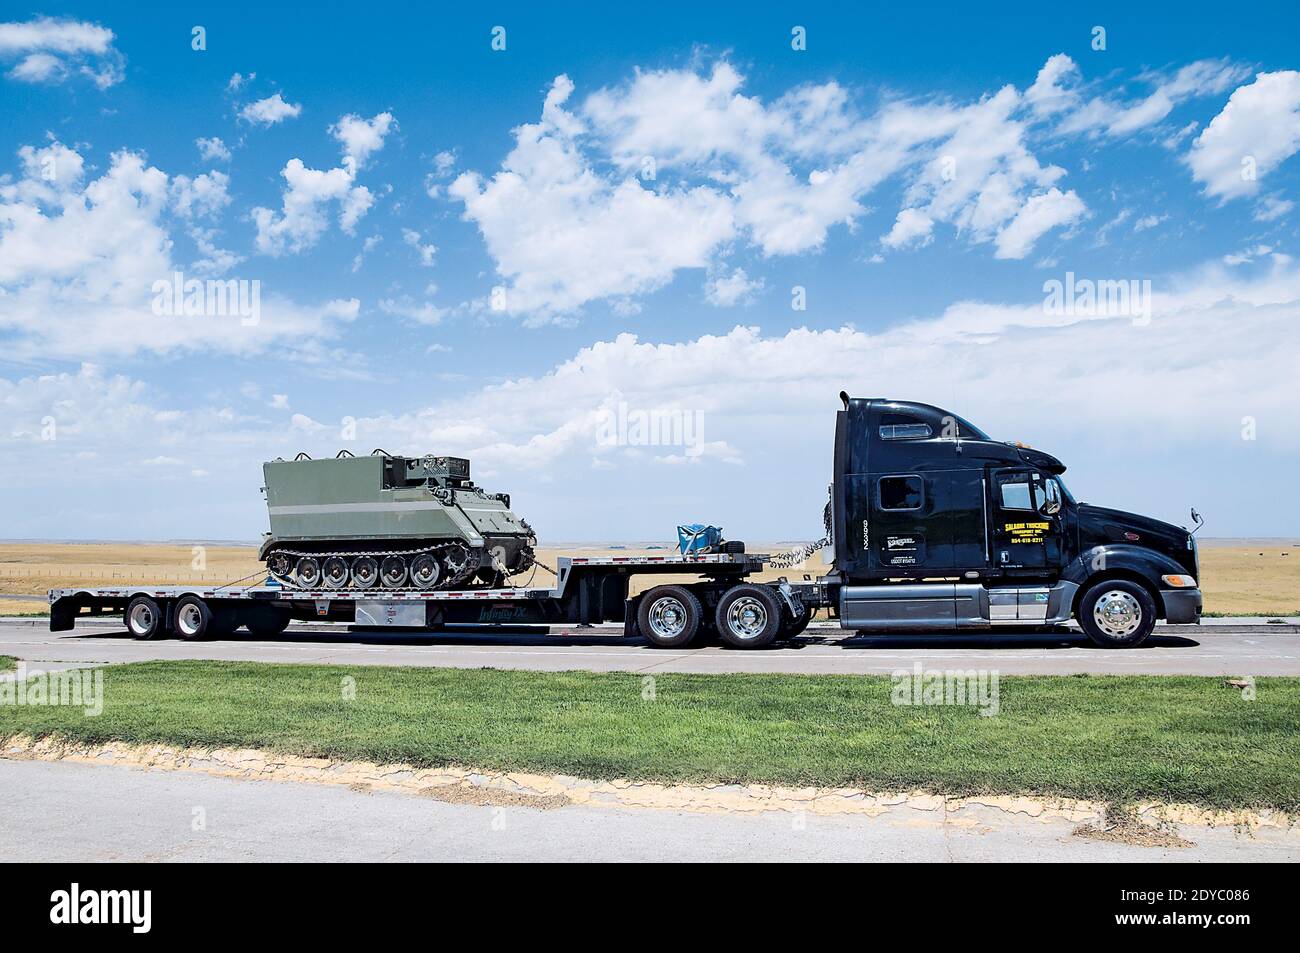 Truck Oversized Load Armored Vehicle Flatbed Stock Photo